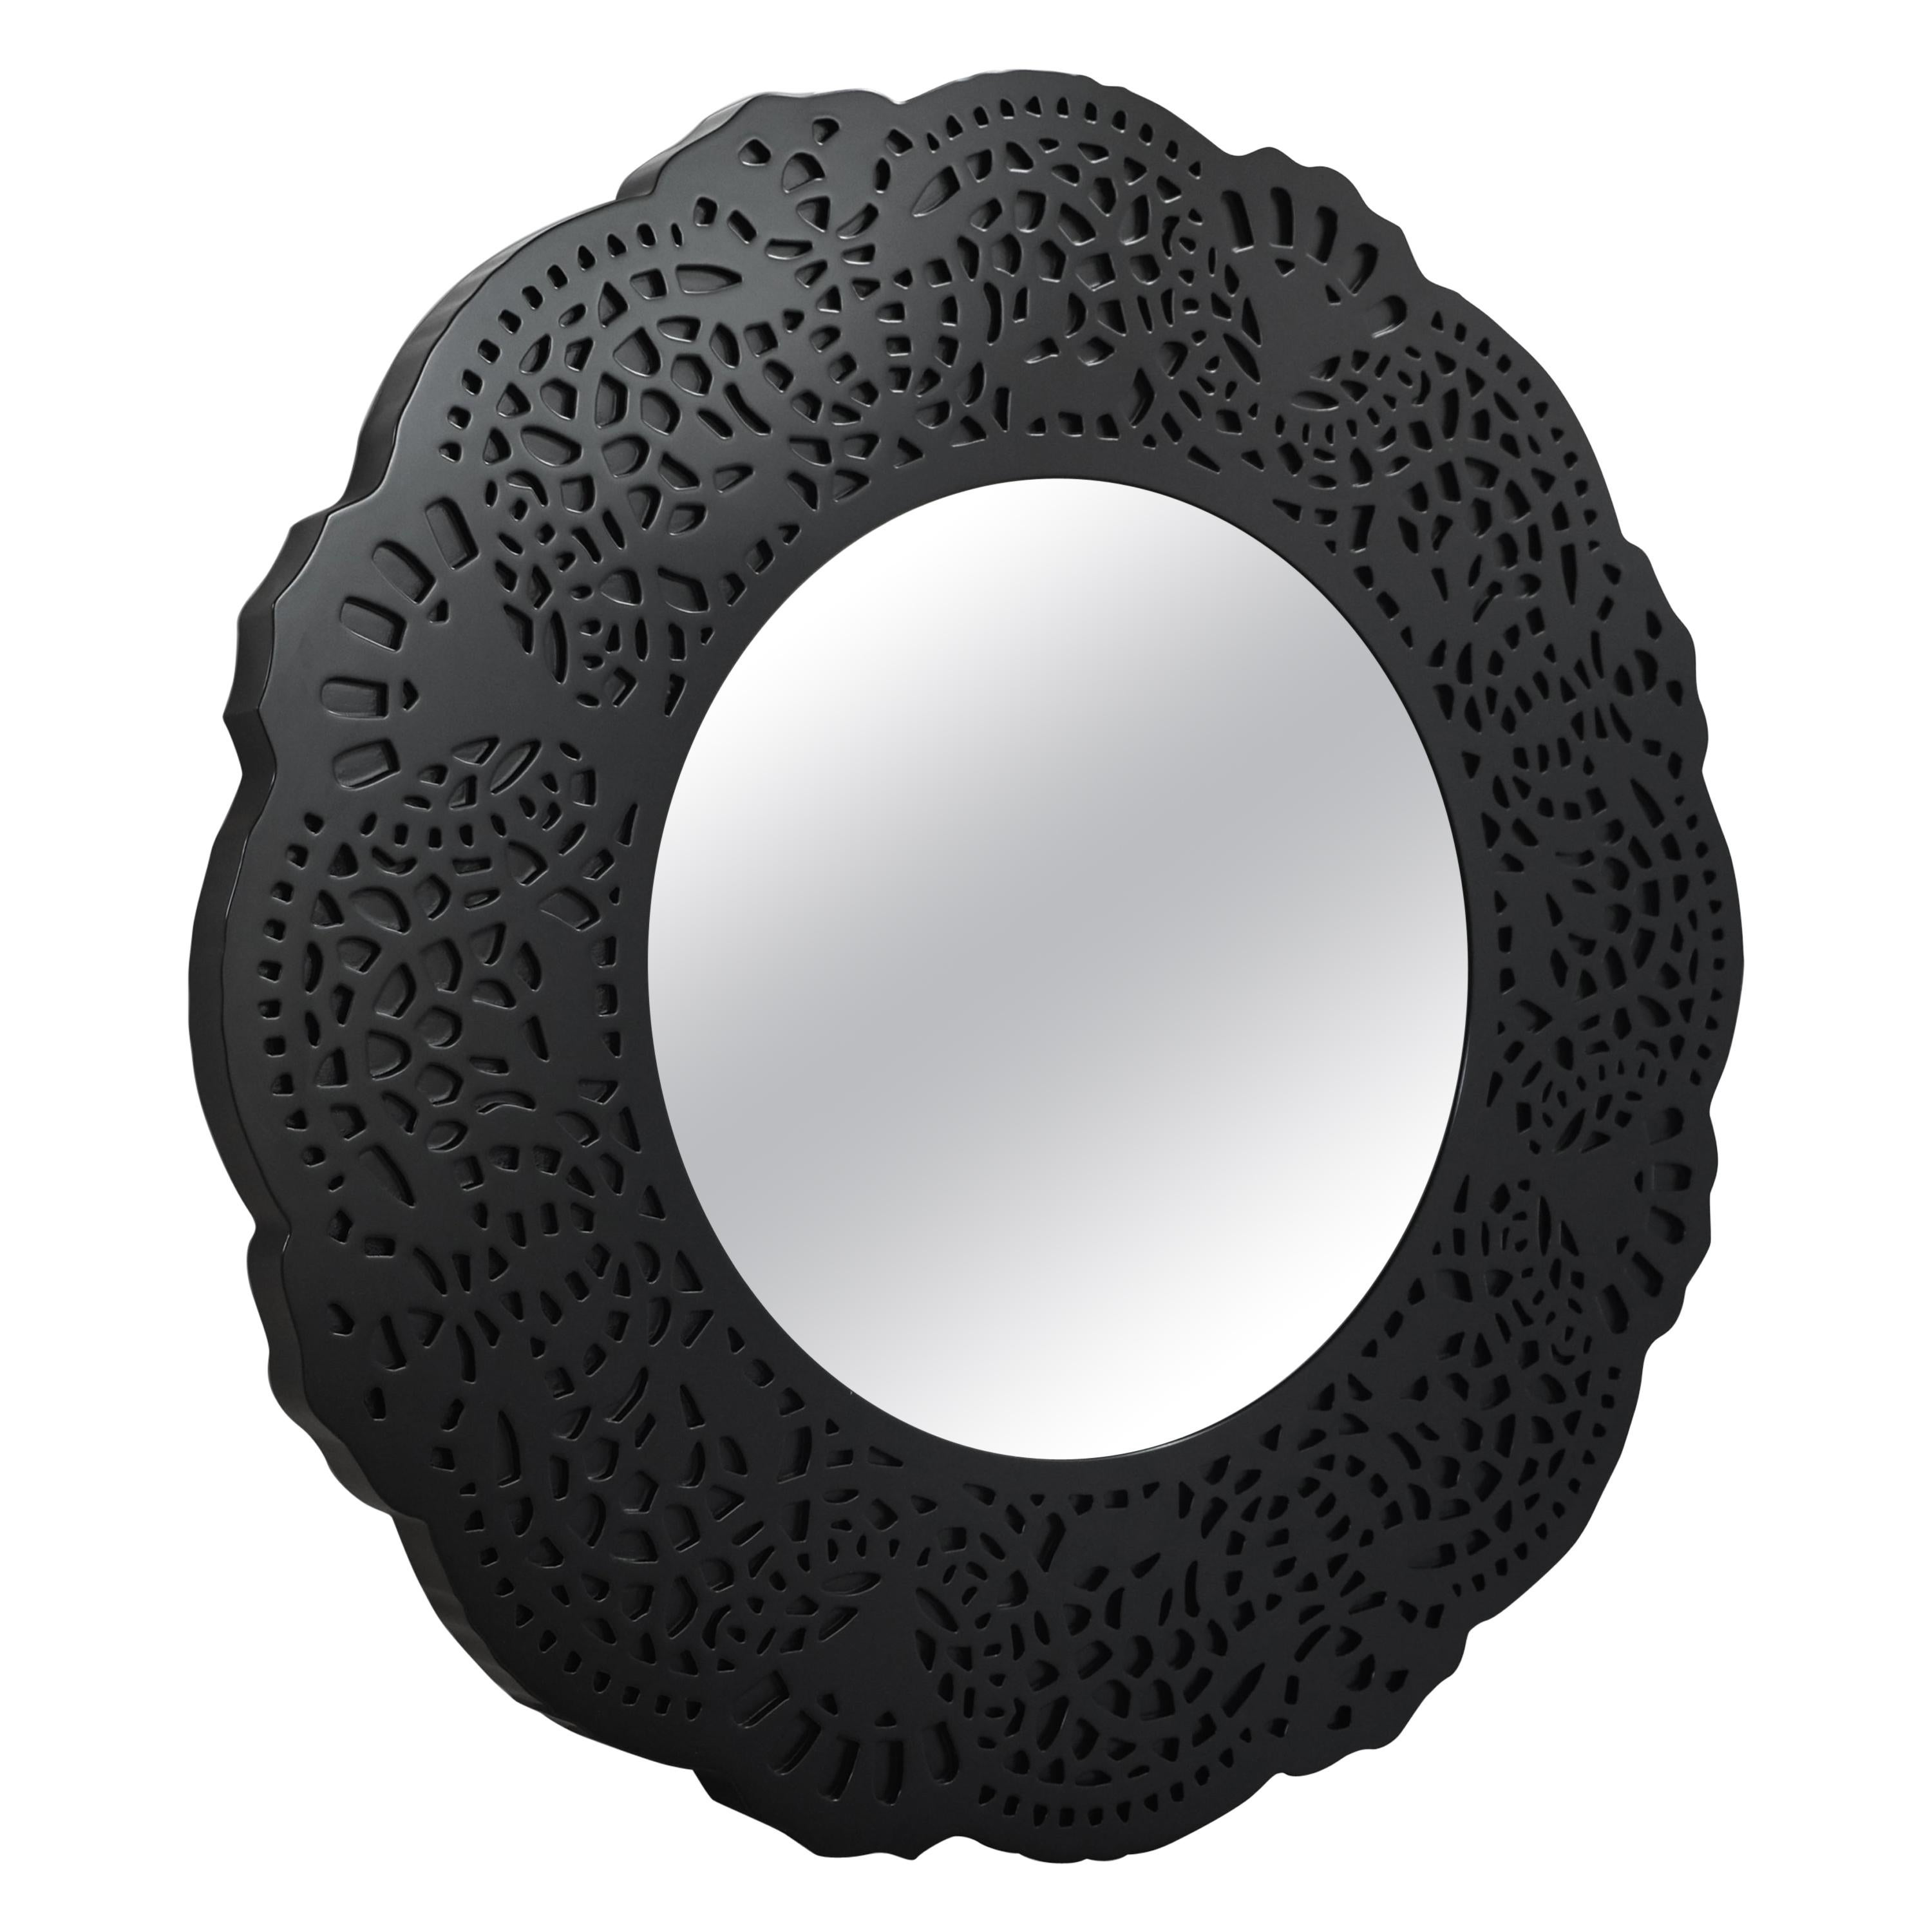 21st Century Crochet Mirror Lacquered Wood